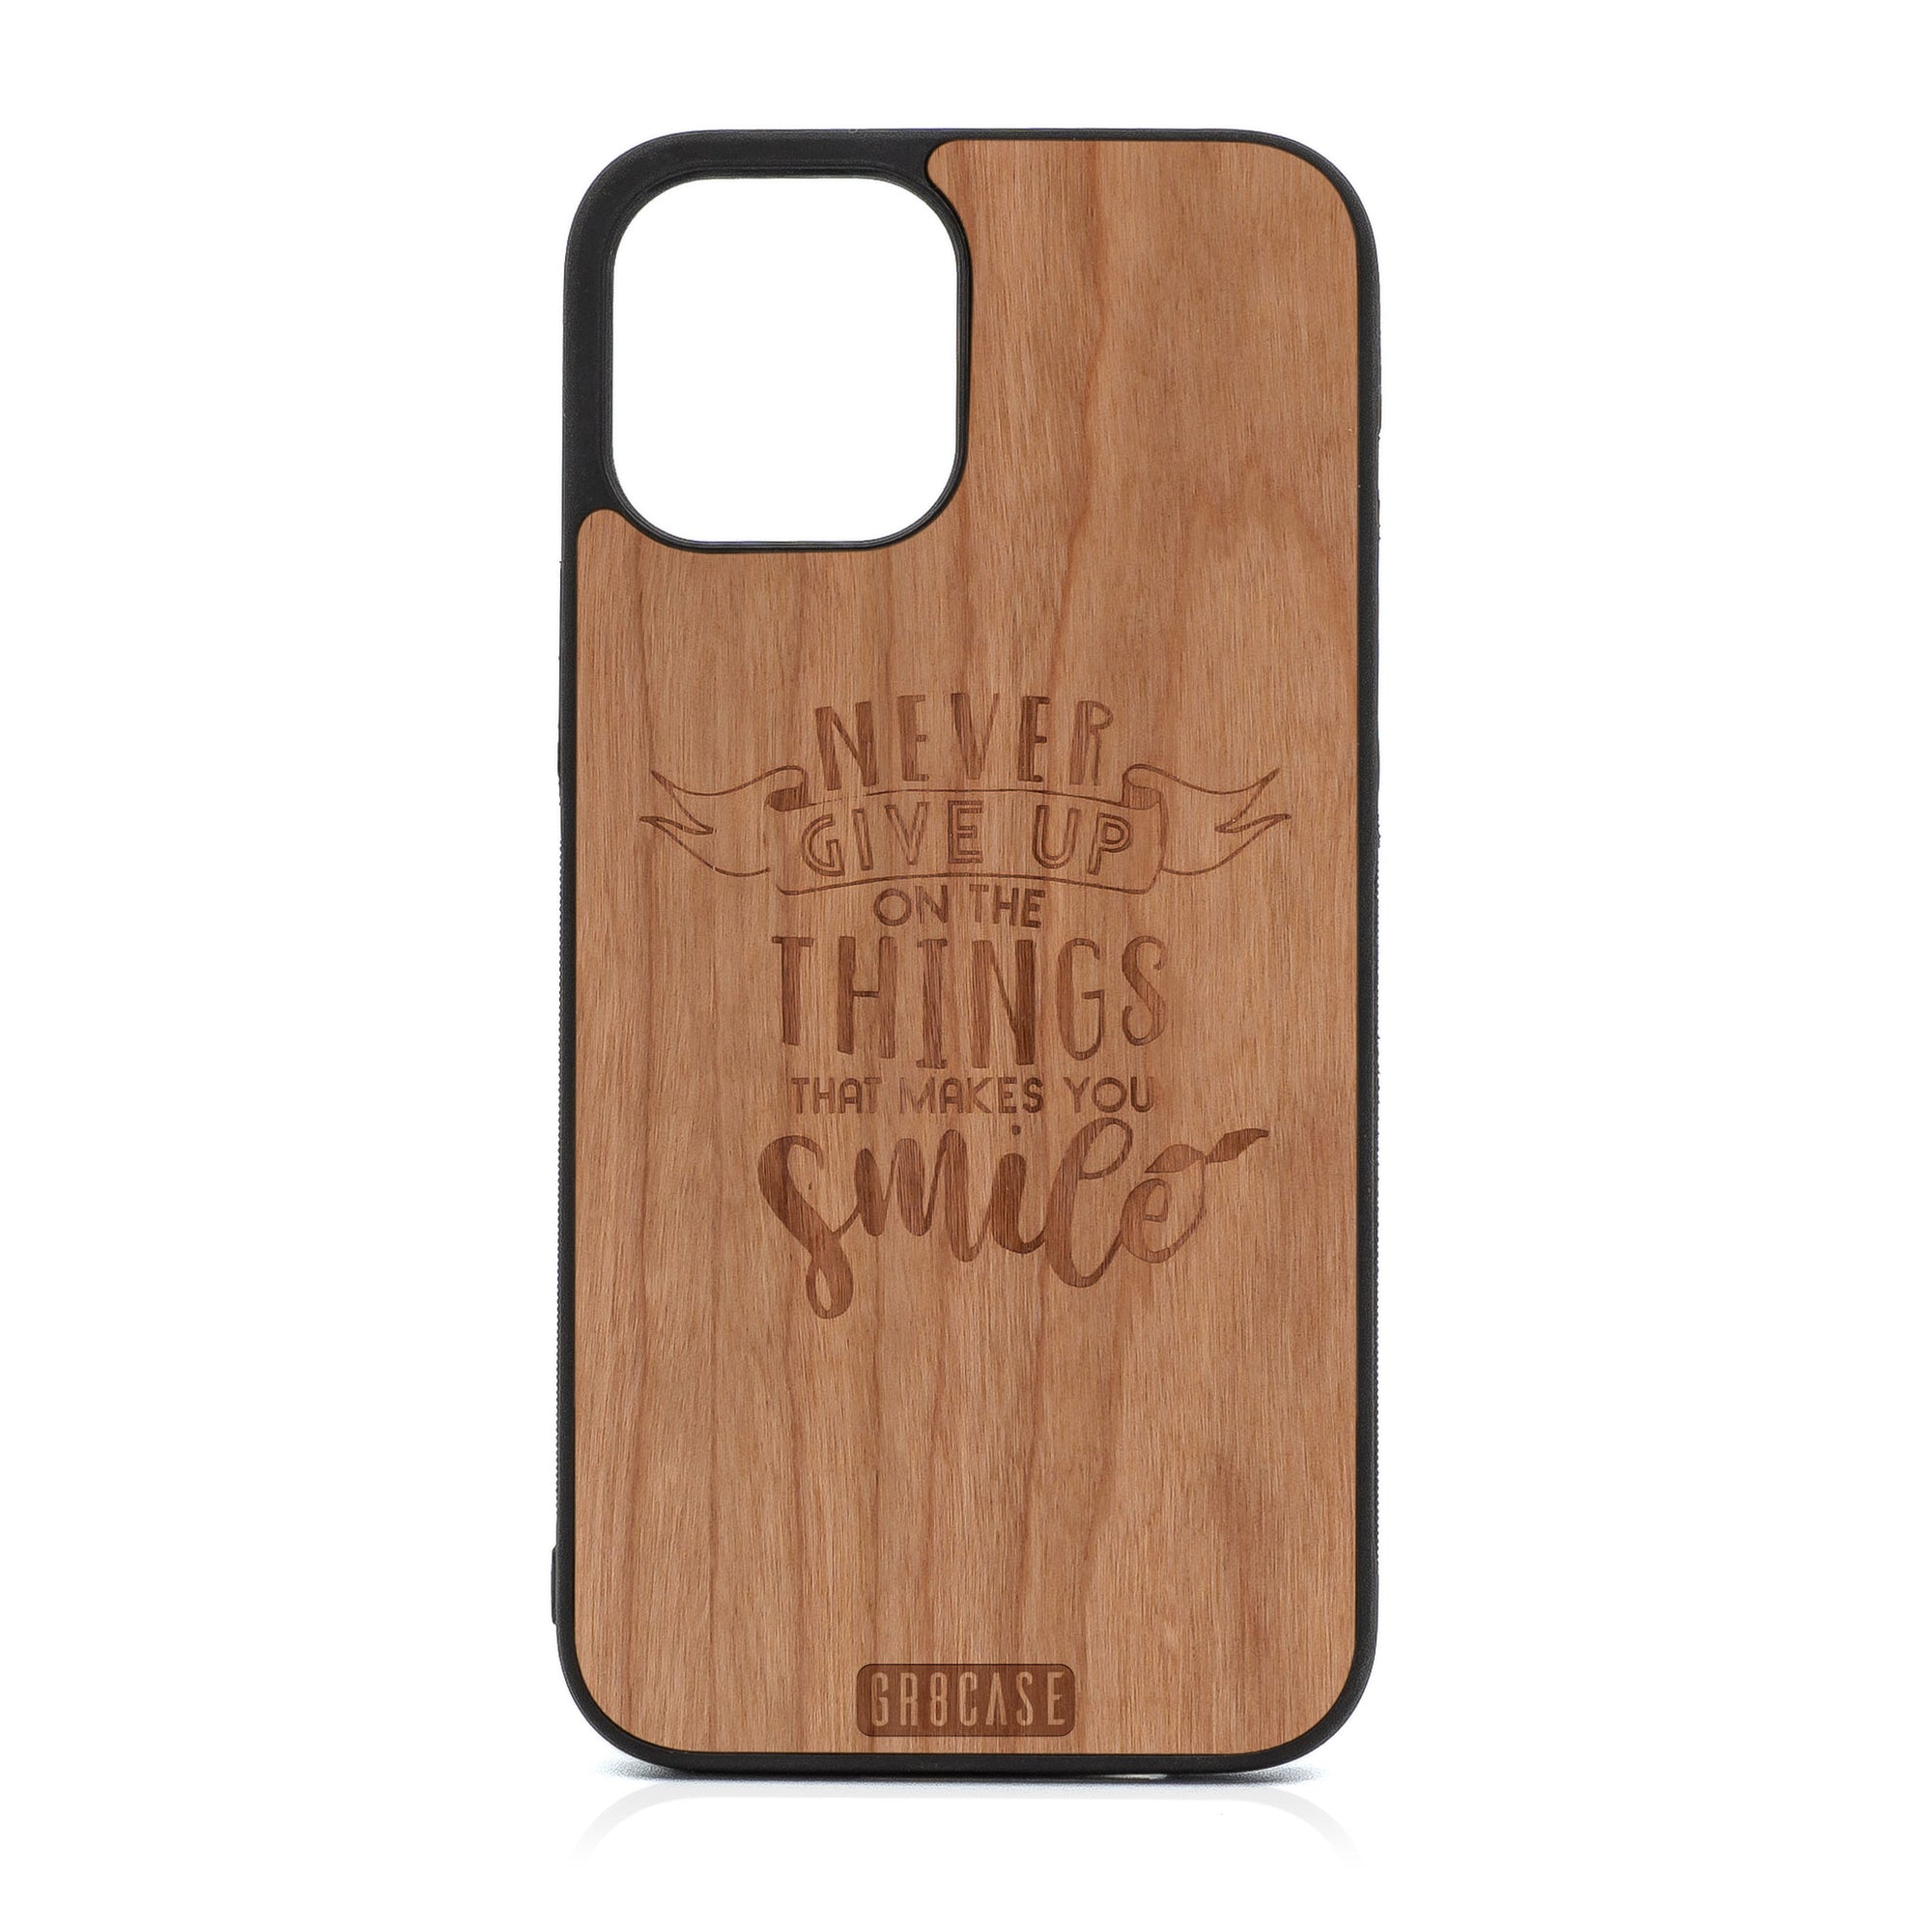 Never Give Up On The Things That Makes You Smile Design Wood Case For iPhone 12 Pro Max